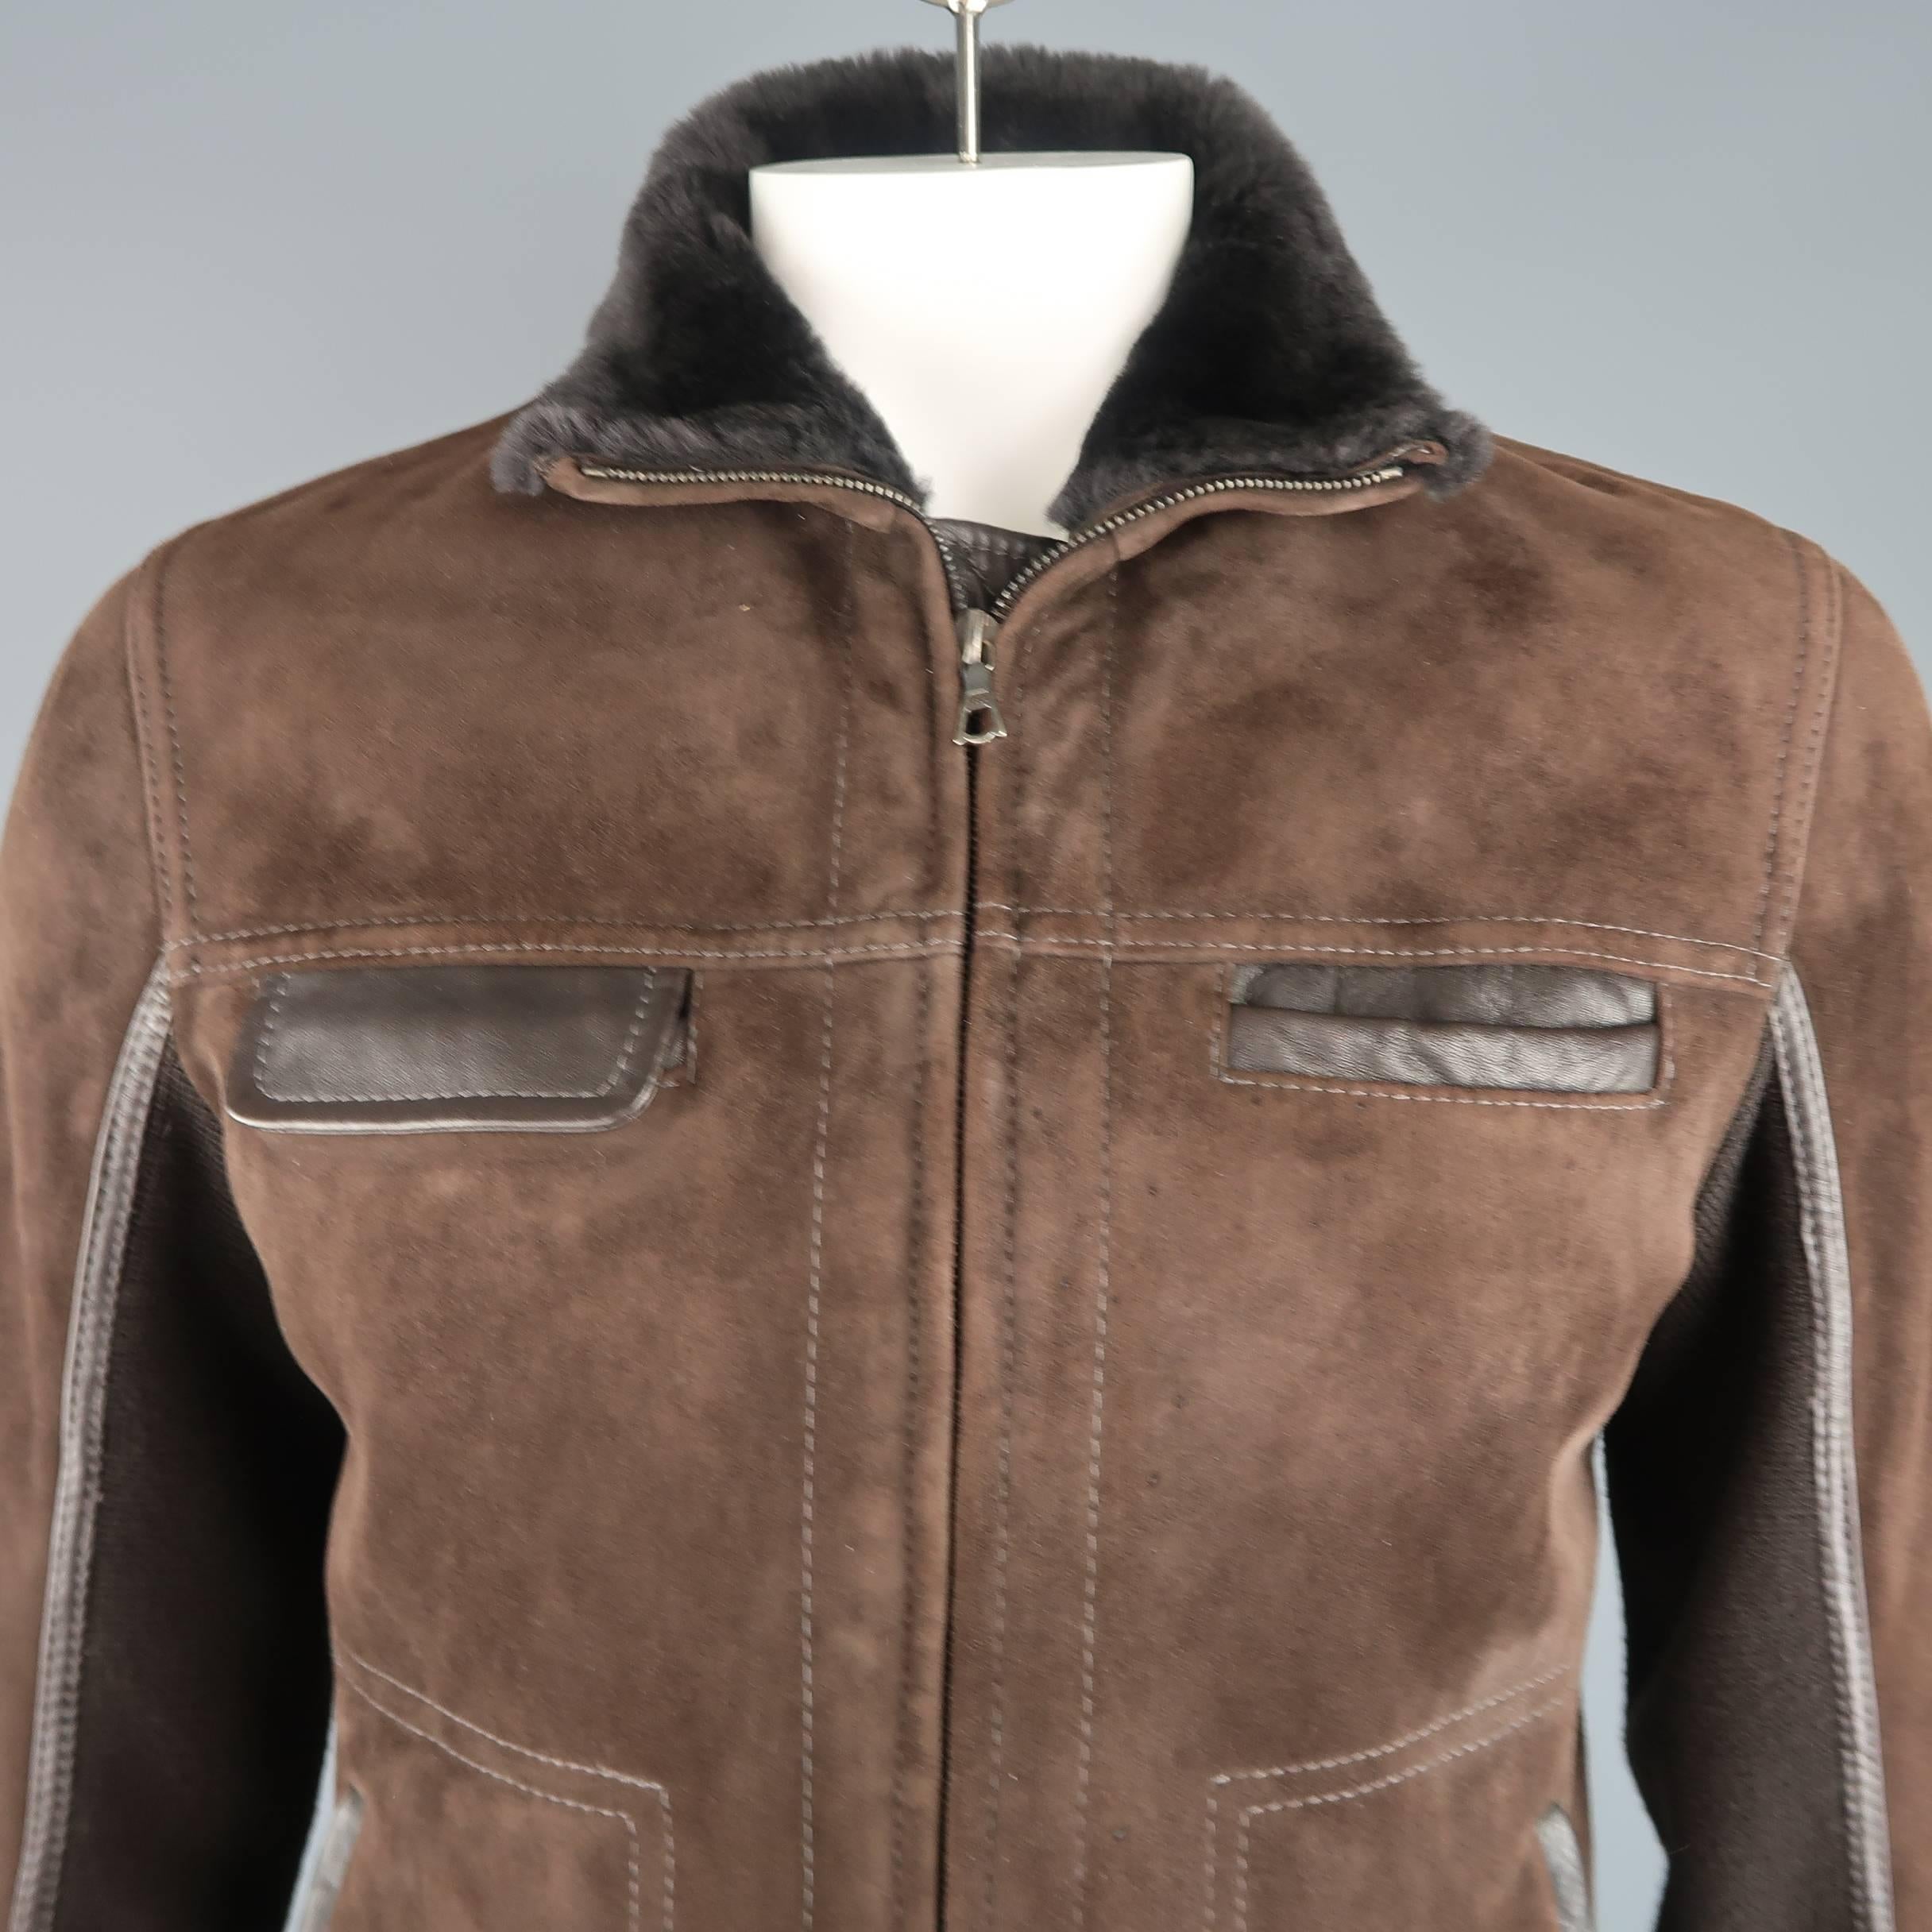 THEORY jacket comes in brown suede shearling with fur interior and features a zip front, leather trimmed pockets, and knit panel sleeves. Spots on front. As-is.
 
Good Pre-Owned Condition.
Marked: L
 
Measurements:
 
Shoulder: 18 in.
Chest: 40